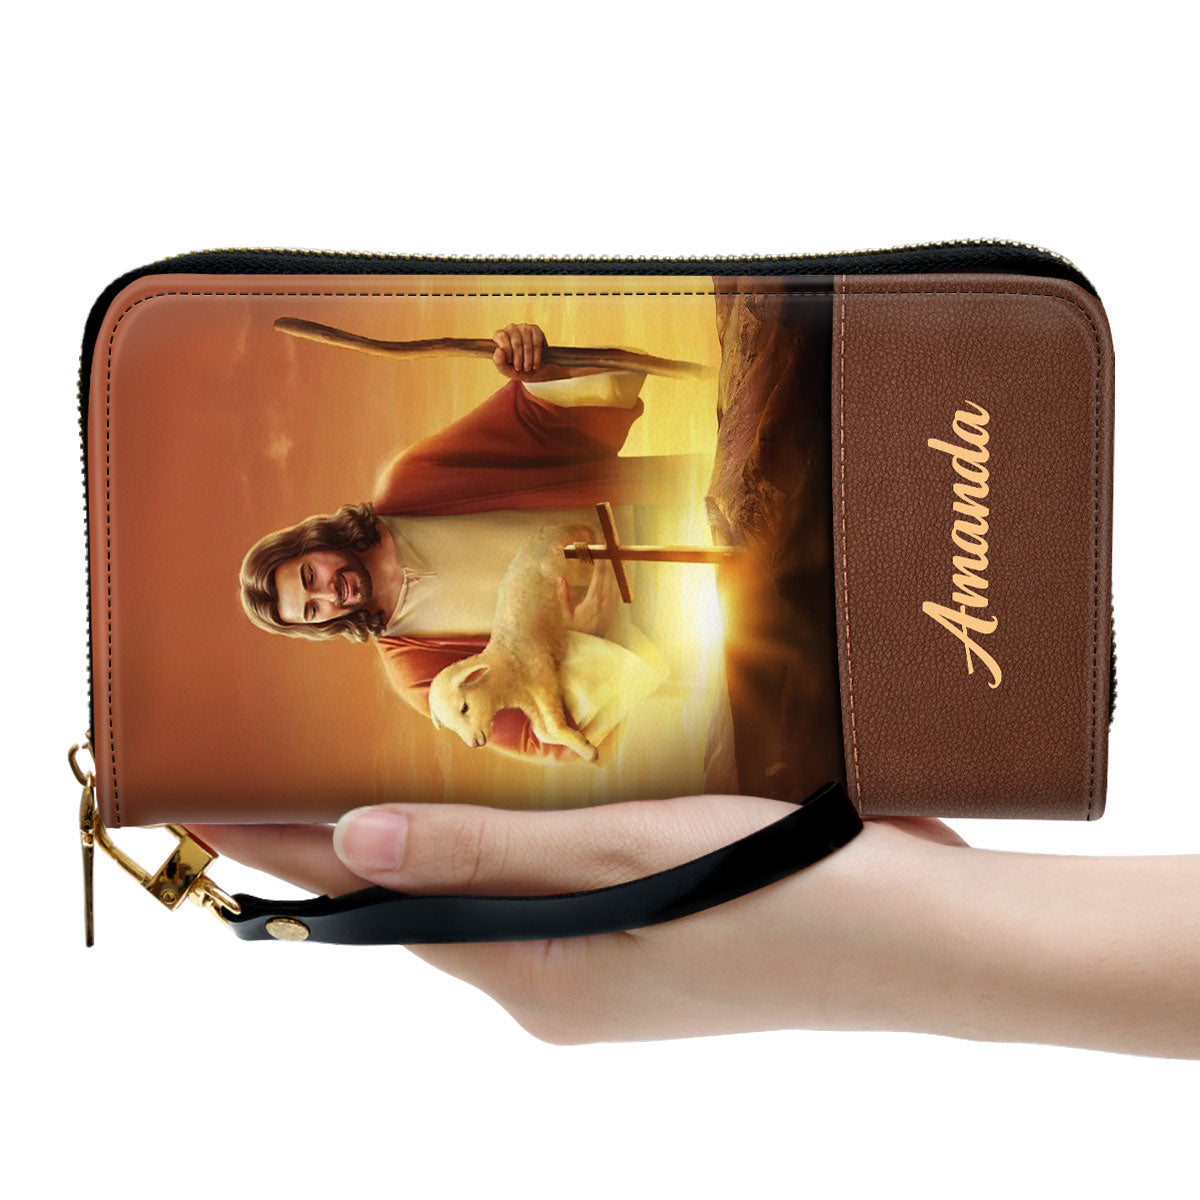 Women Clutch Purse - For I Am Your God Isaiah 4110 Personalized Zippered Leather Clutch Purse Inspirational Gifts For Christian Women